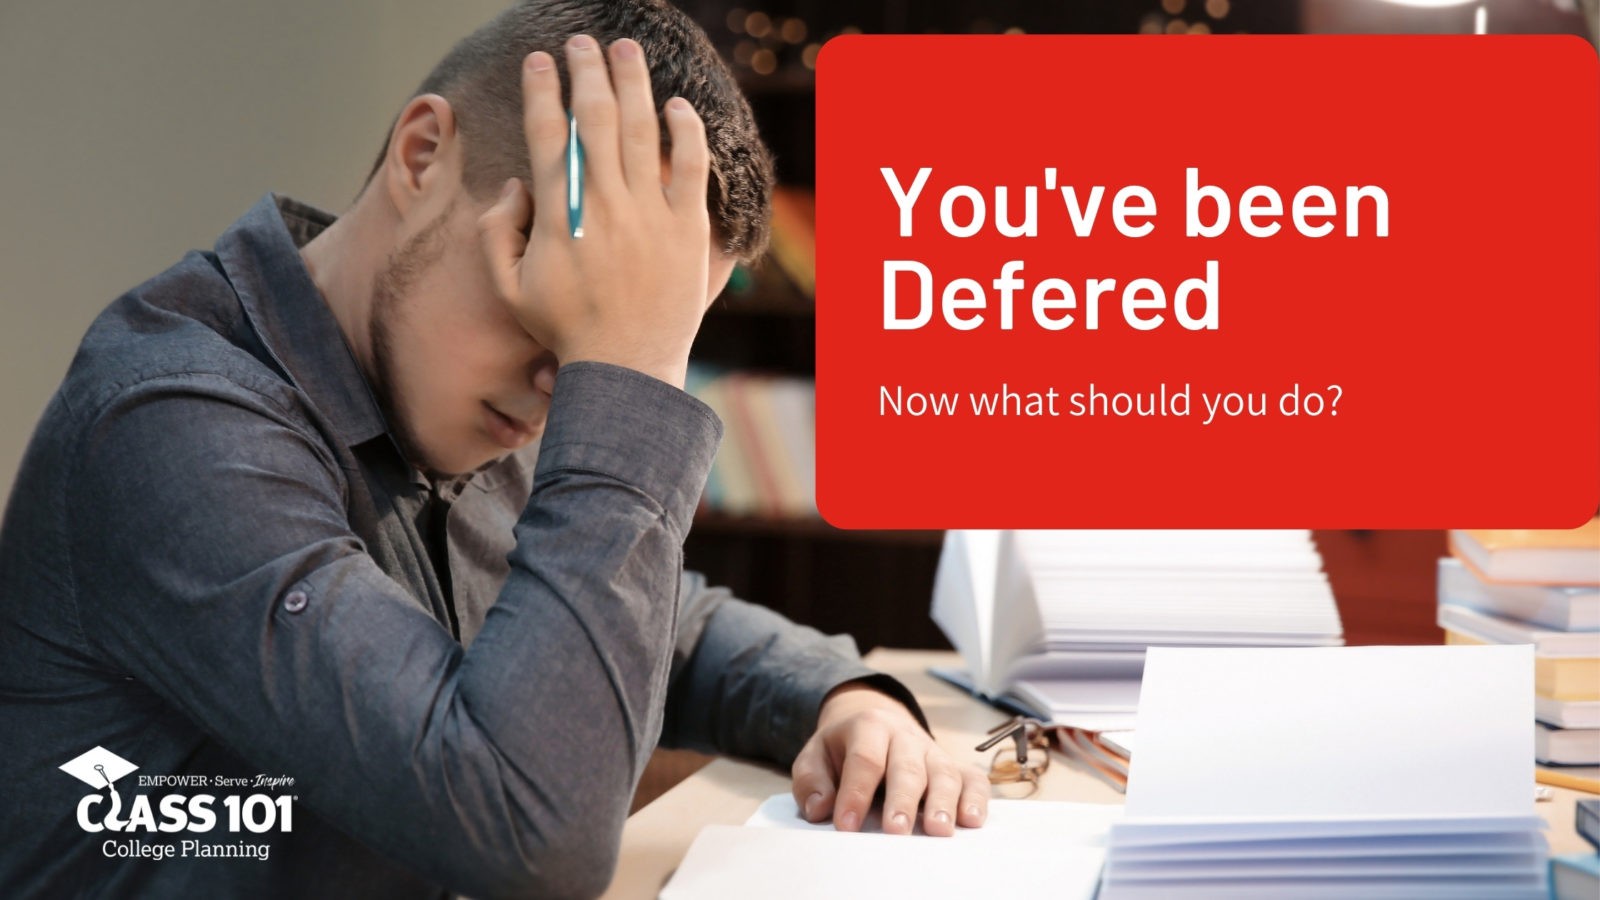 College Deferment: What to Do If You Get Deferred